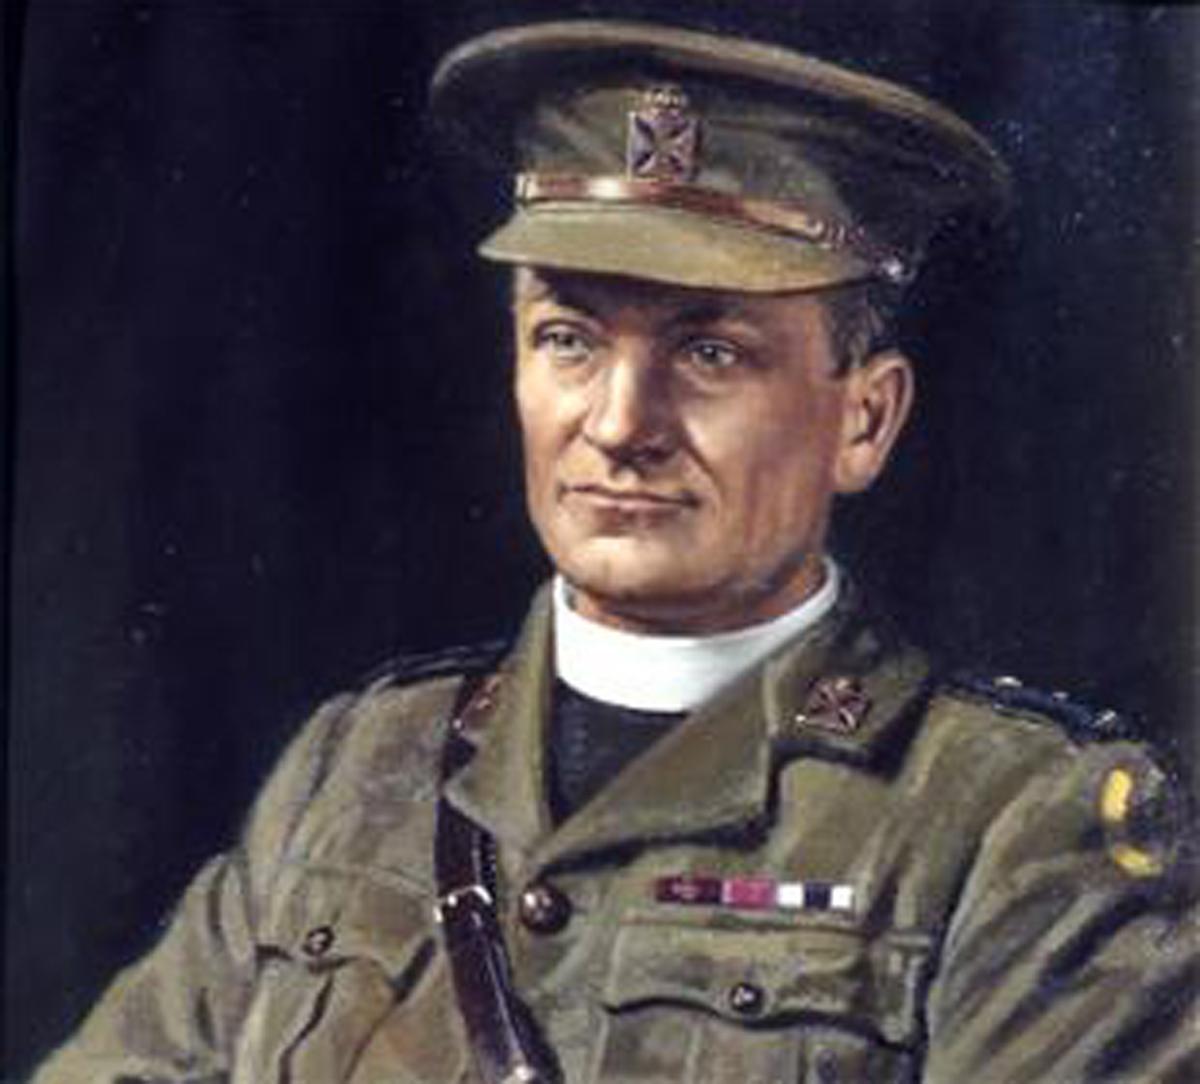 Rev'd Theodore Bayley Hardy VC, Vicar of Hutton Roof, who was the UK's most decorated Great War non-combatant